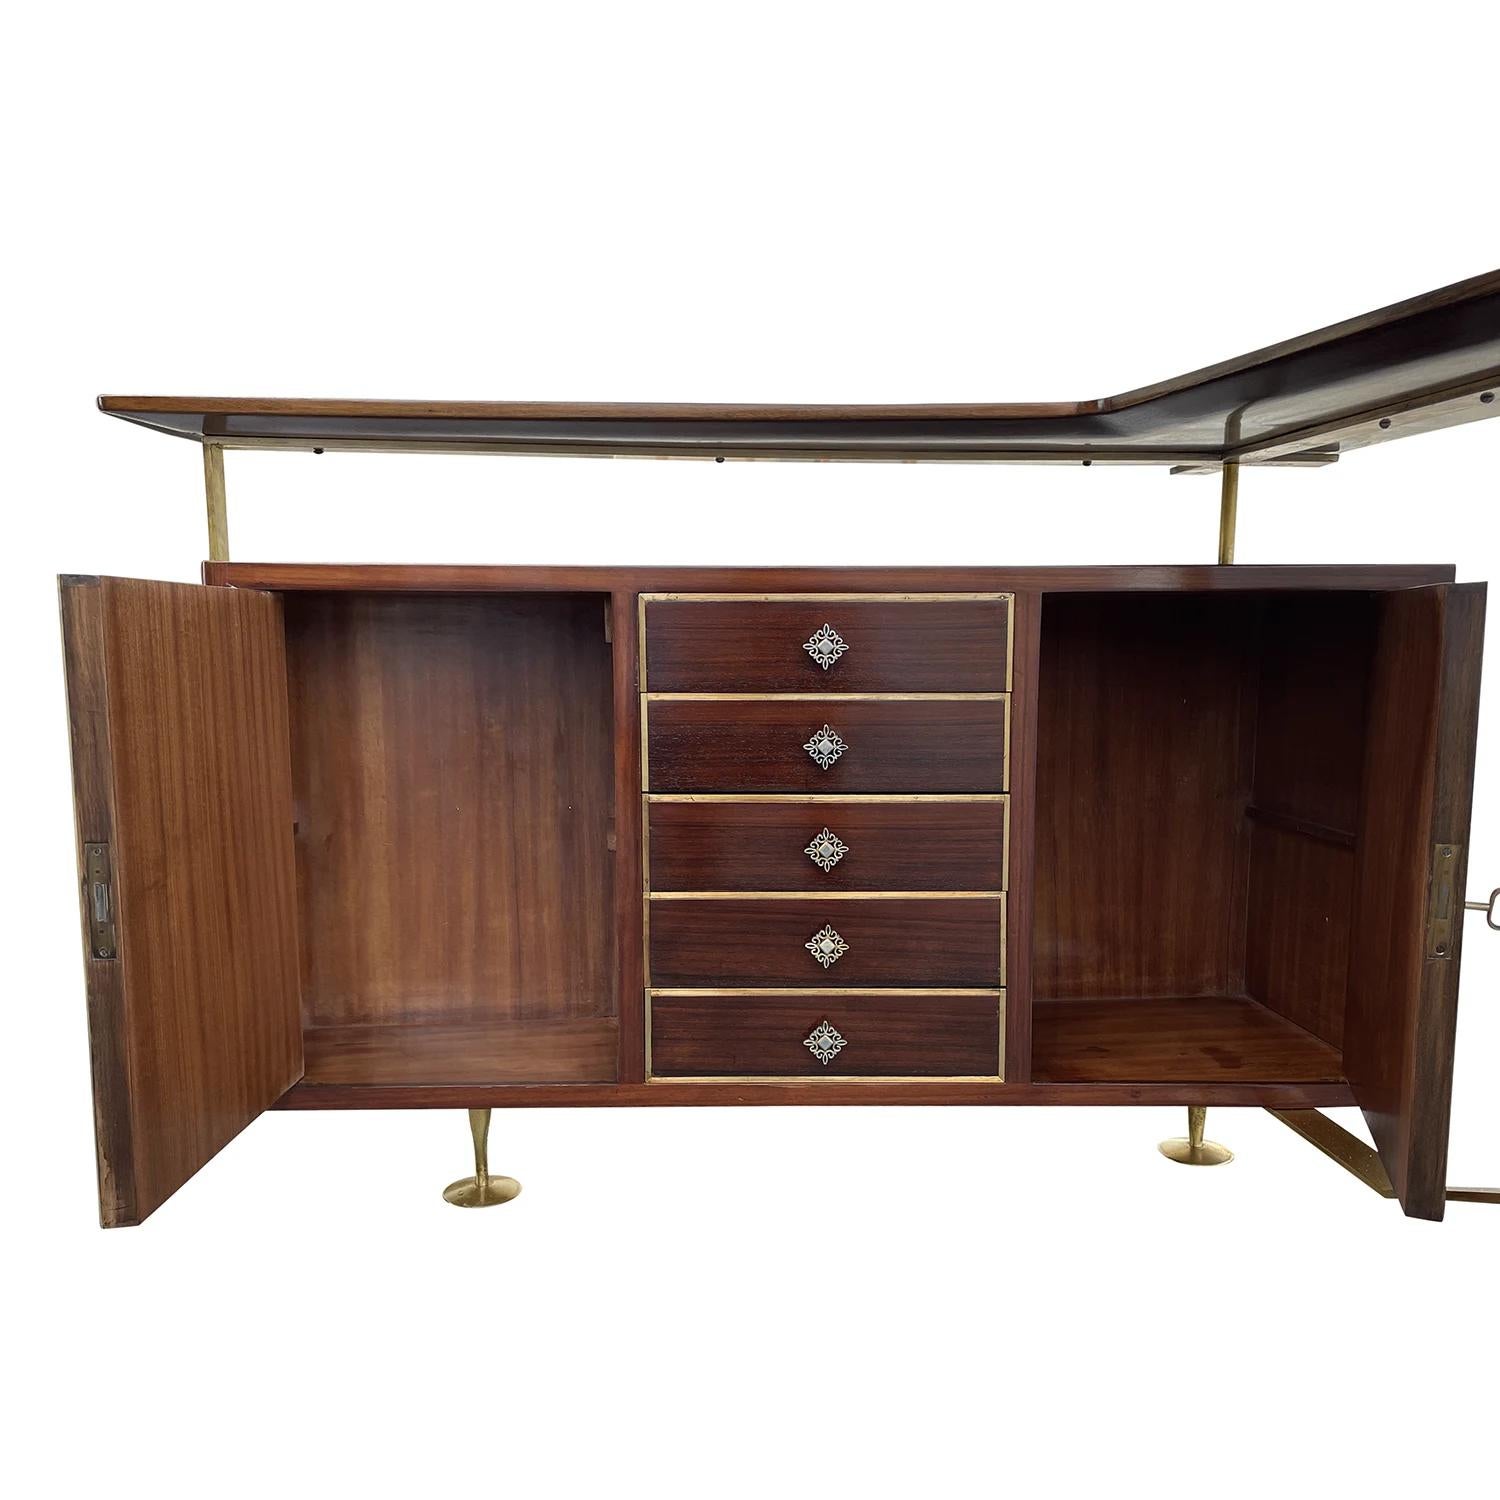 20th Century Italian Narrow Polished Walnut Cocktail Bar - Vintage Cabinet In Good Condition For Sale In West Palm Beach, FL